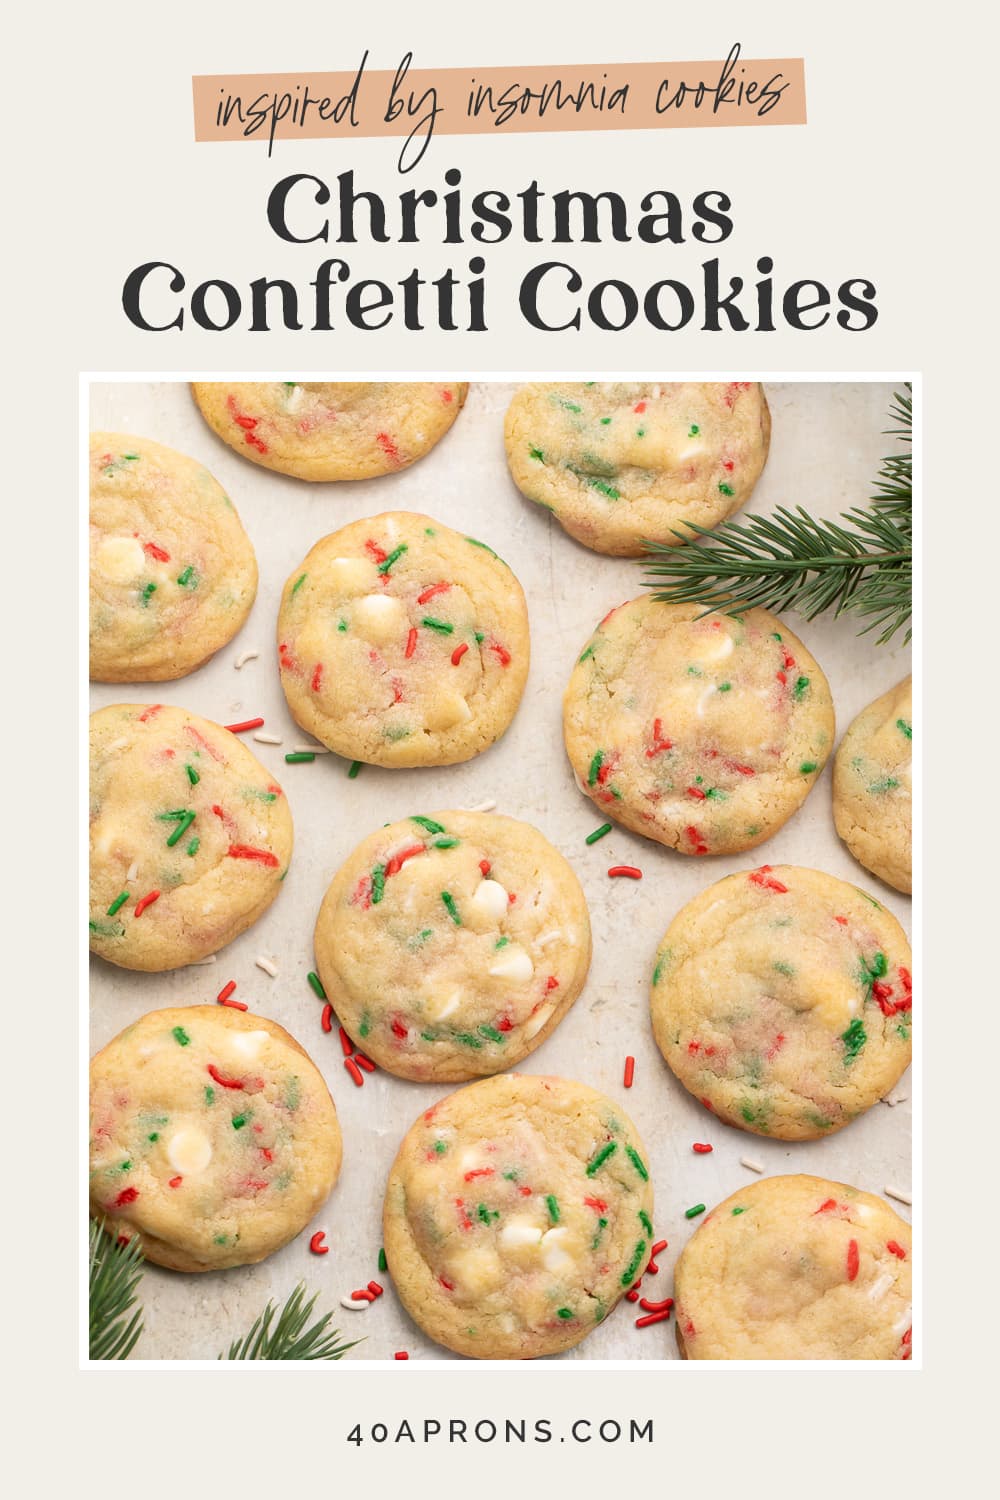 Pin graphic for Christmas confetti cookies.